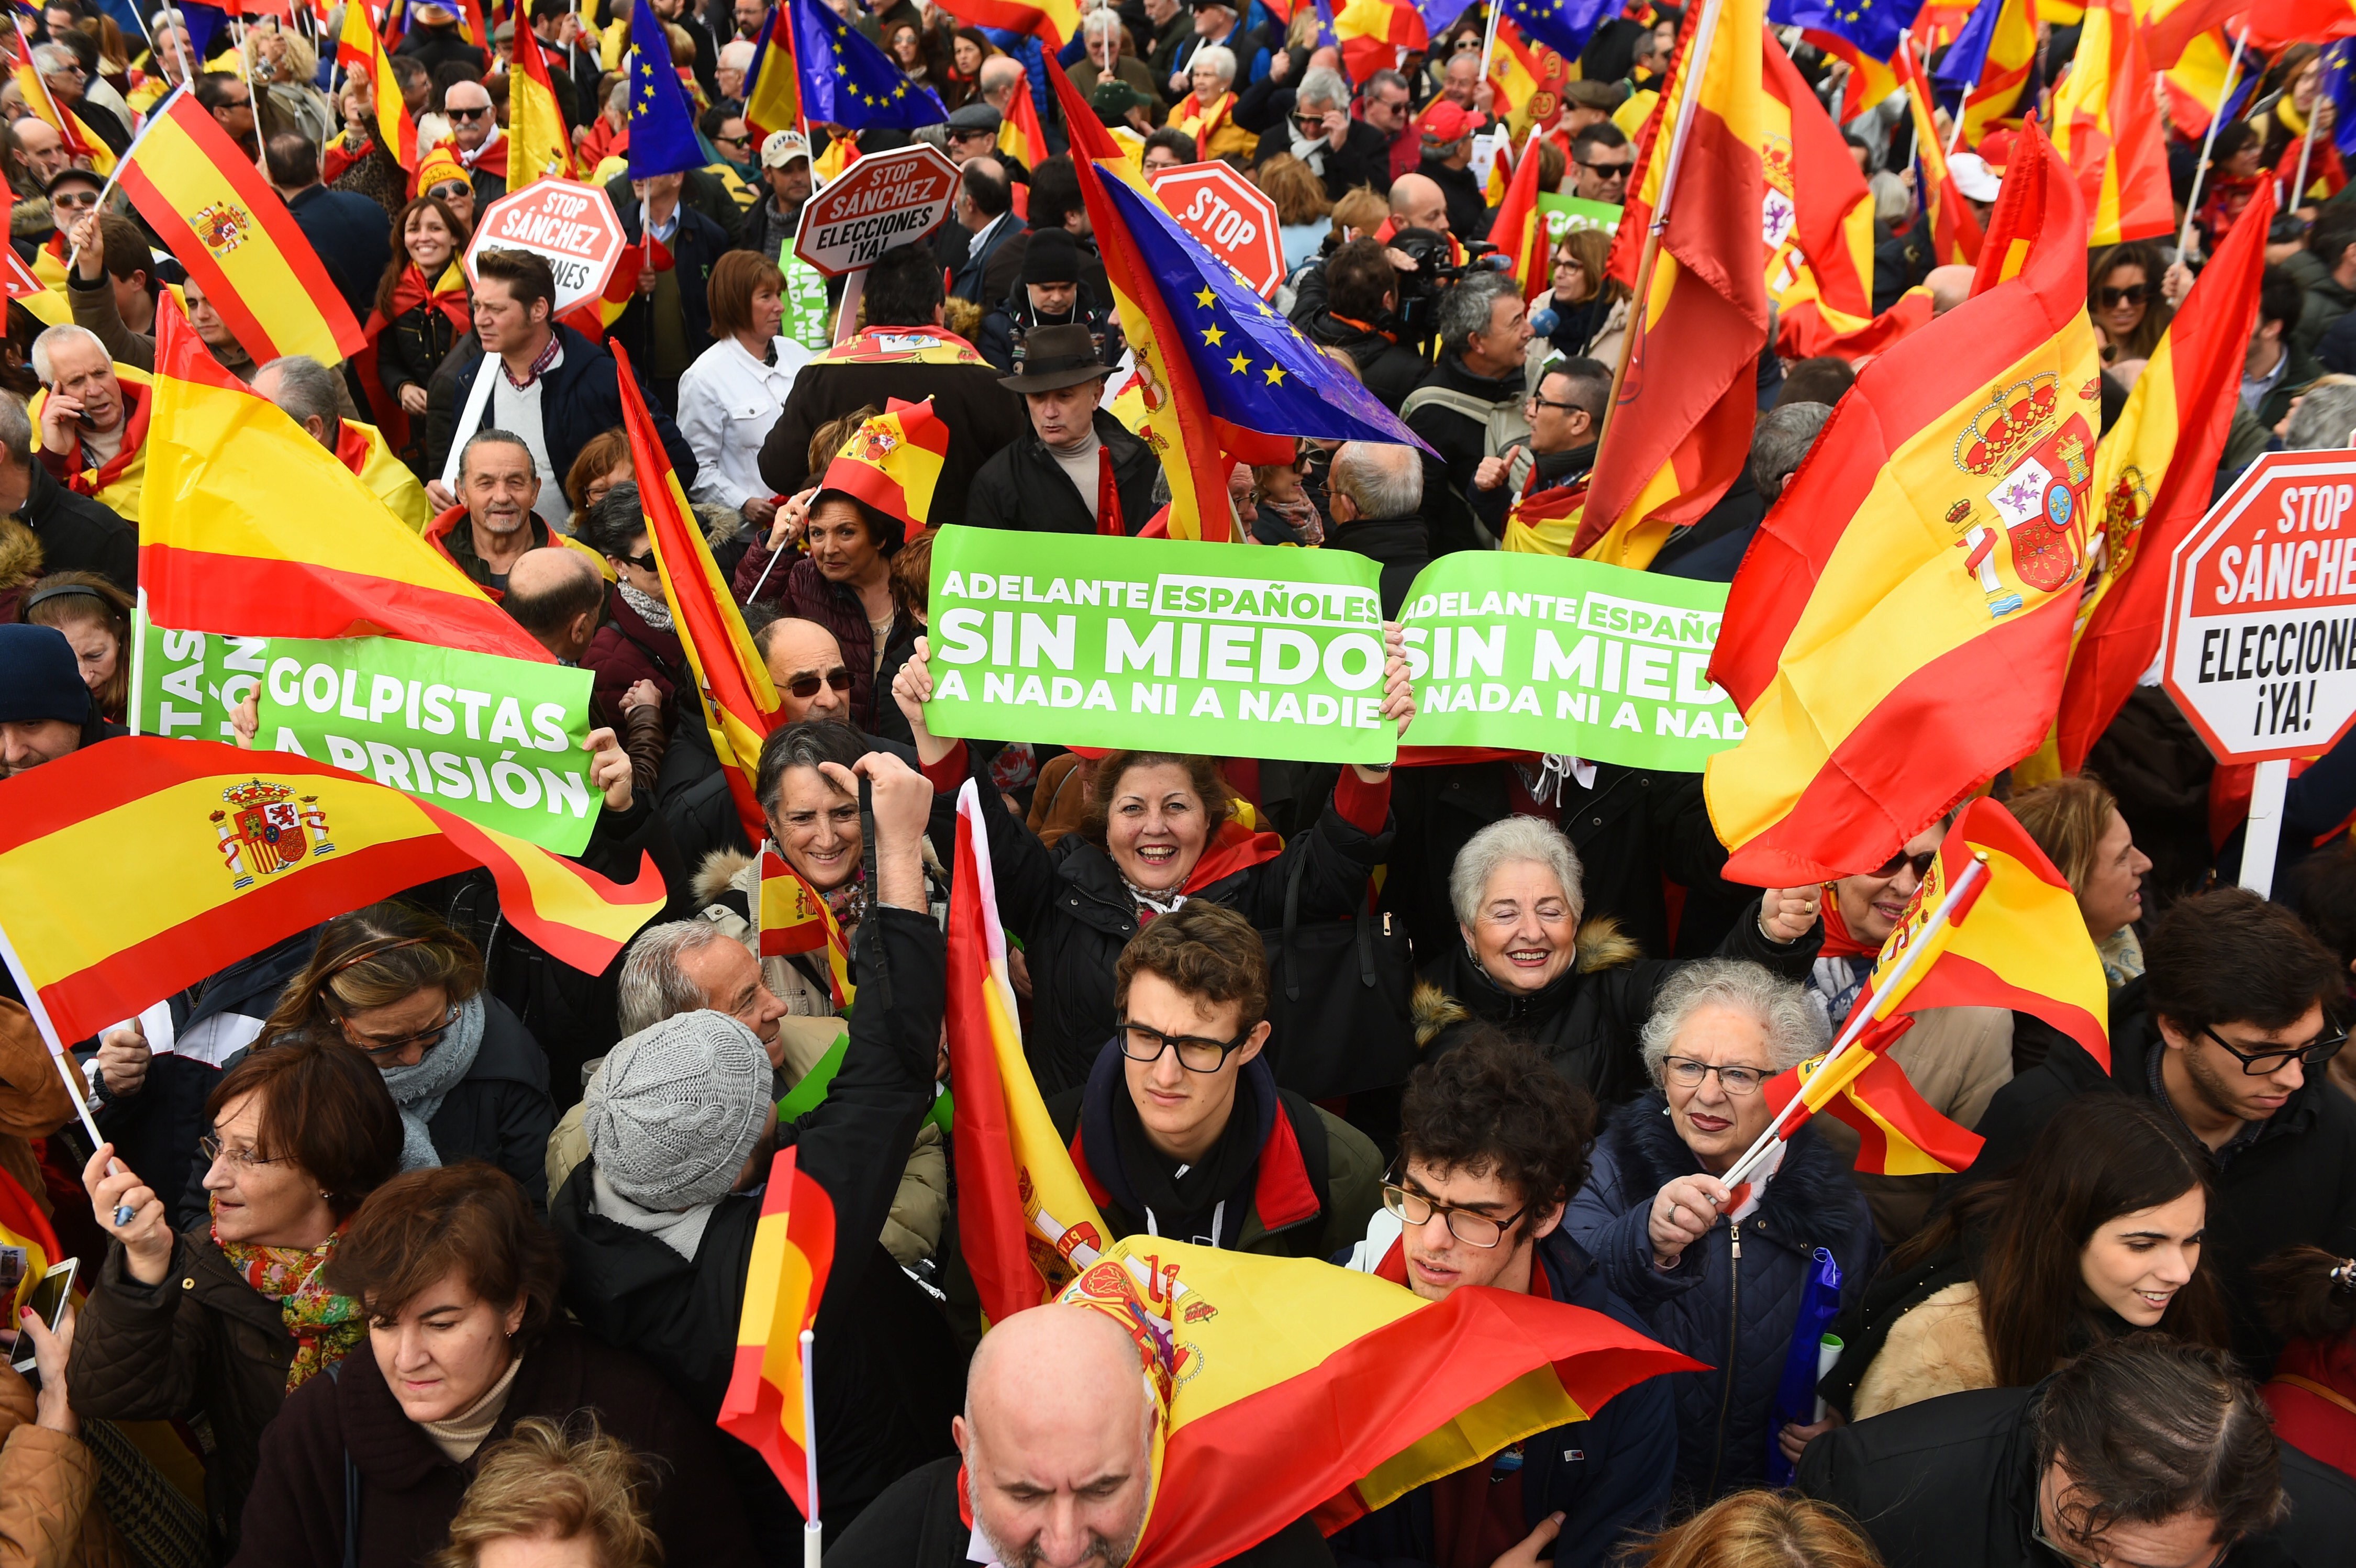 People participate in a rally on February 10 in Madrid, Spain, called by the People’s Party and Ciudadanos to demand a general election. The rally was organised to protest against talks between Prime Minister Pedro Sanchez’s government and Catalan pro-independence leaders. Photo: EPA-EFE